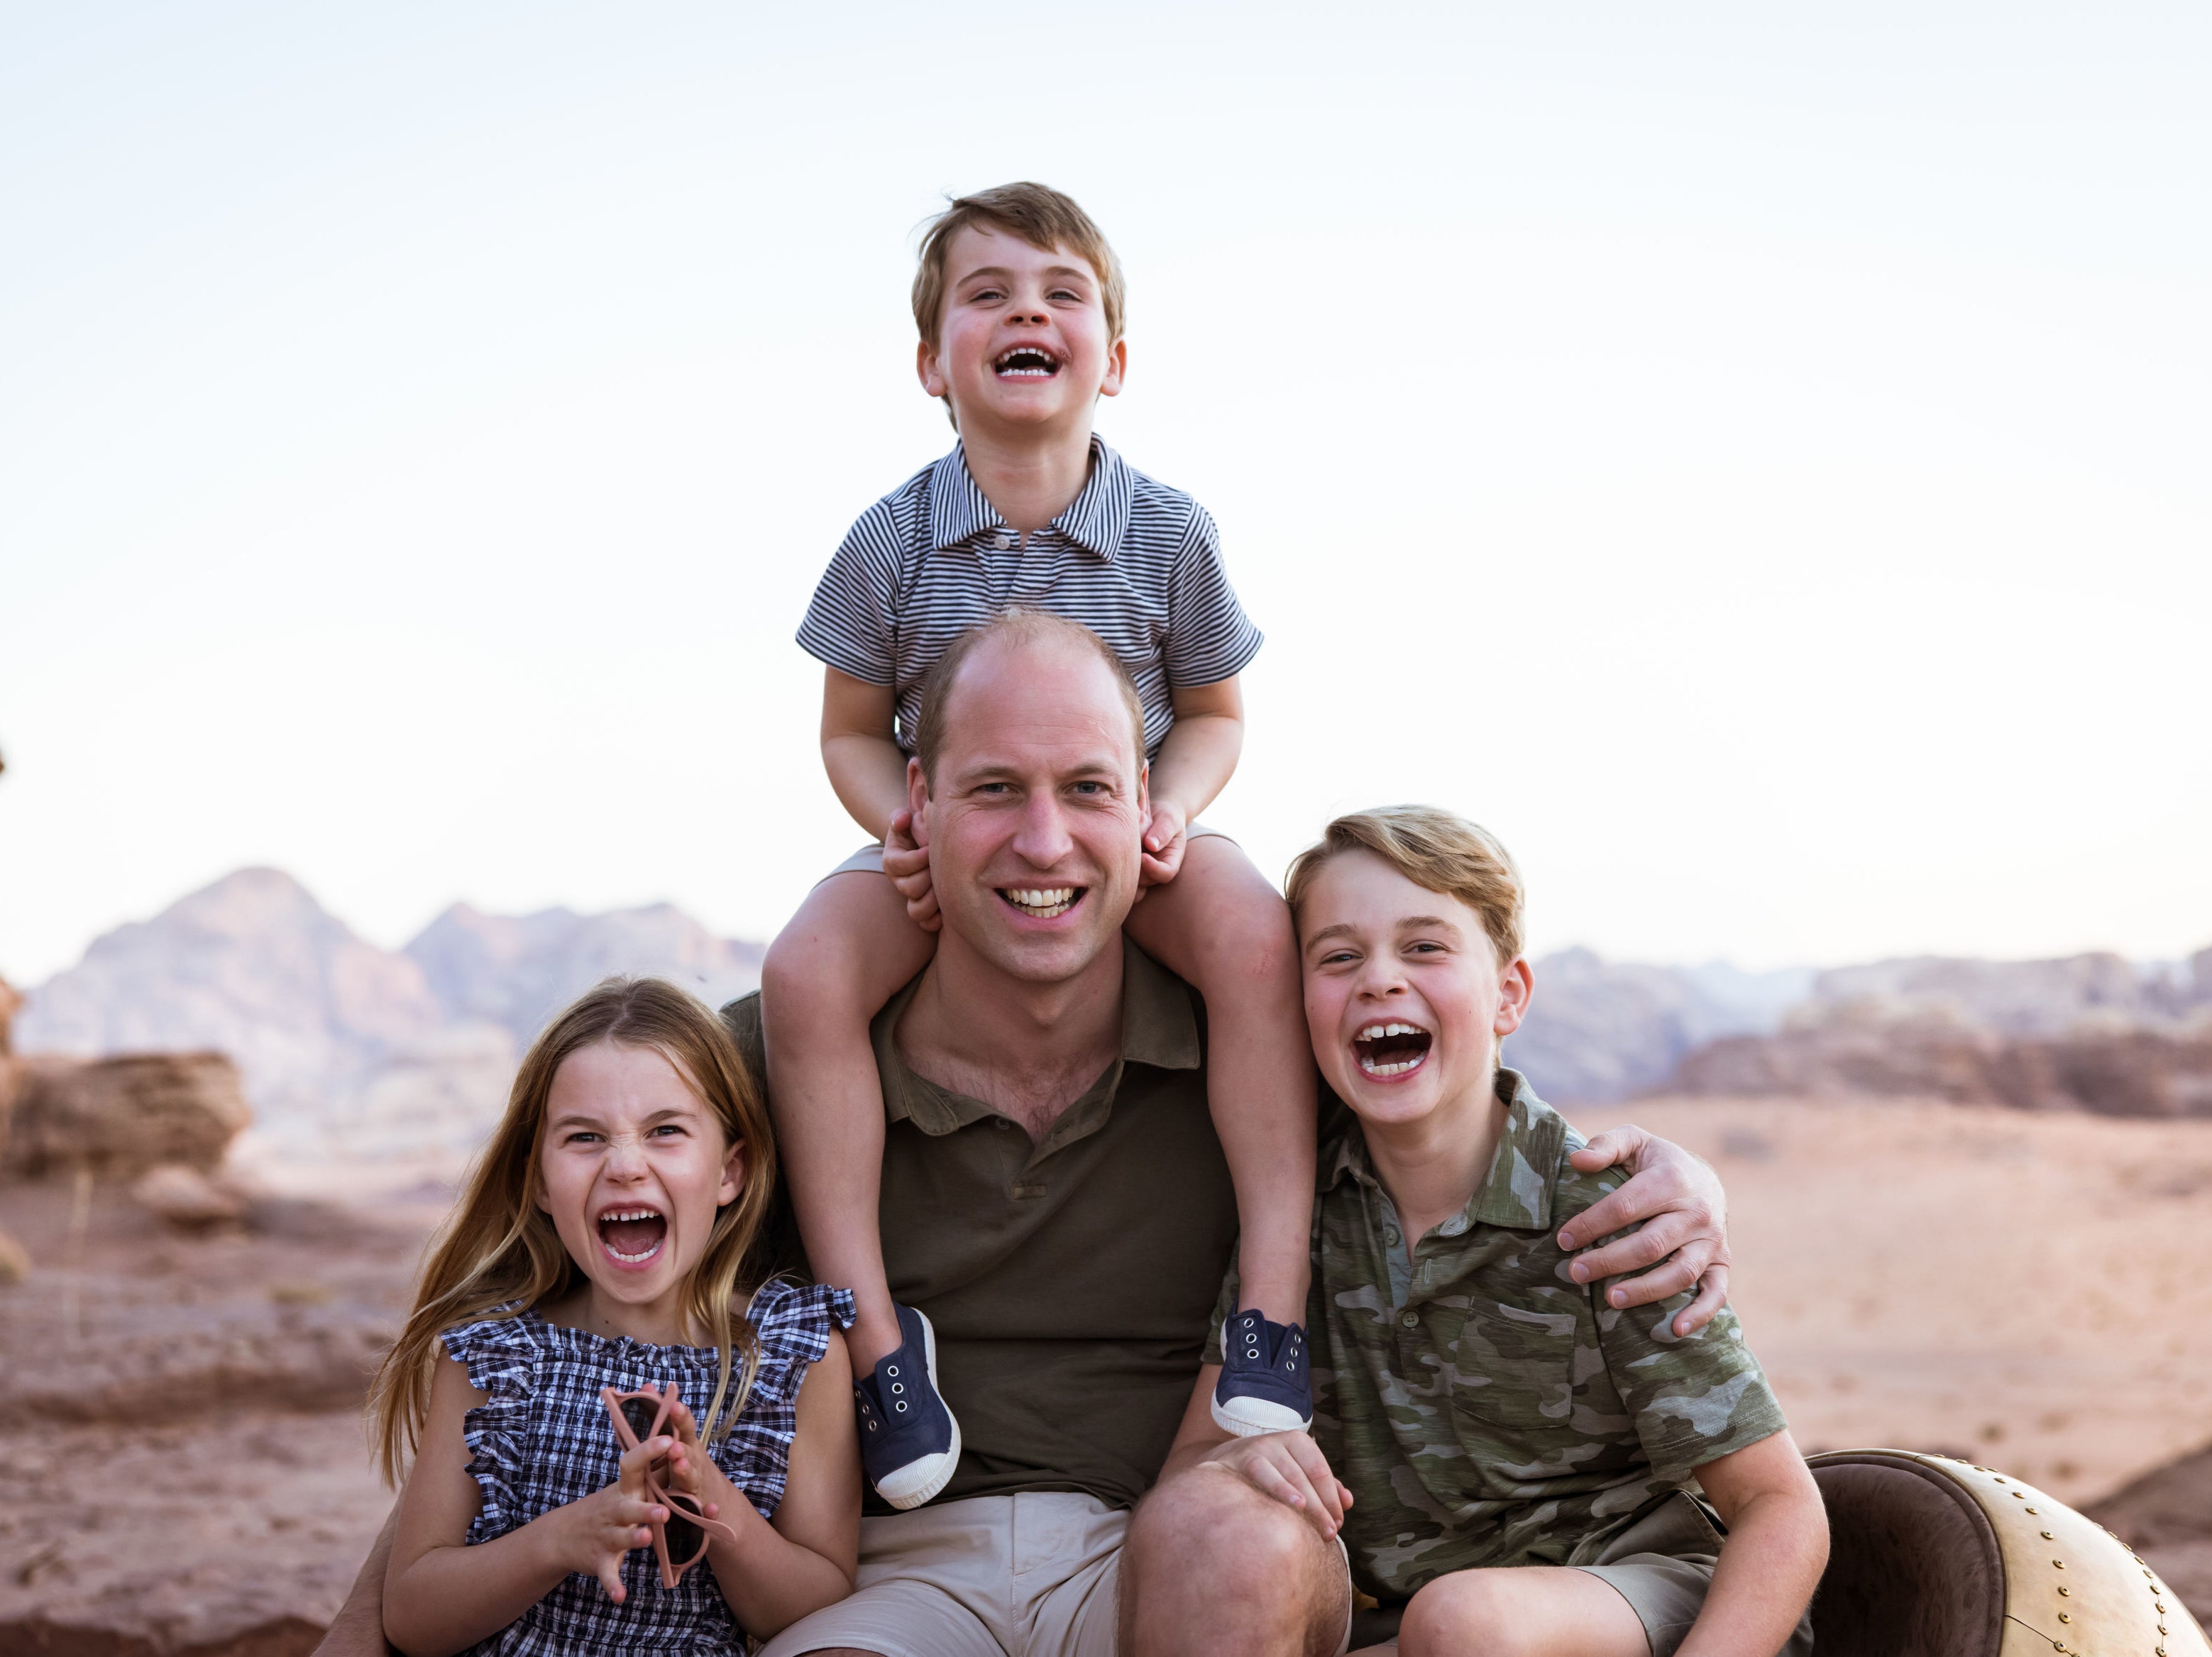 Handout photo issued by Kensington Palace of the Duke of Cambridge with his children, Prince Louis, Prince George (right) and Princess Charlotte, to mark Father’s Day 2022